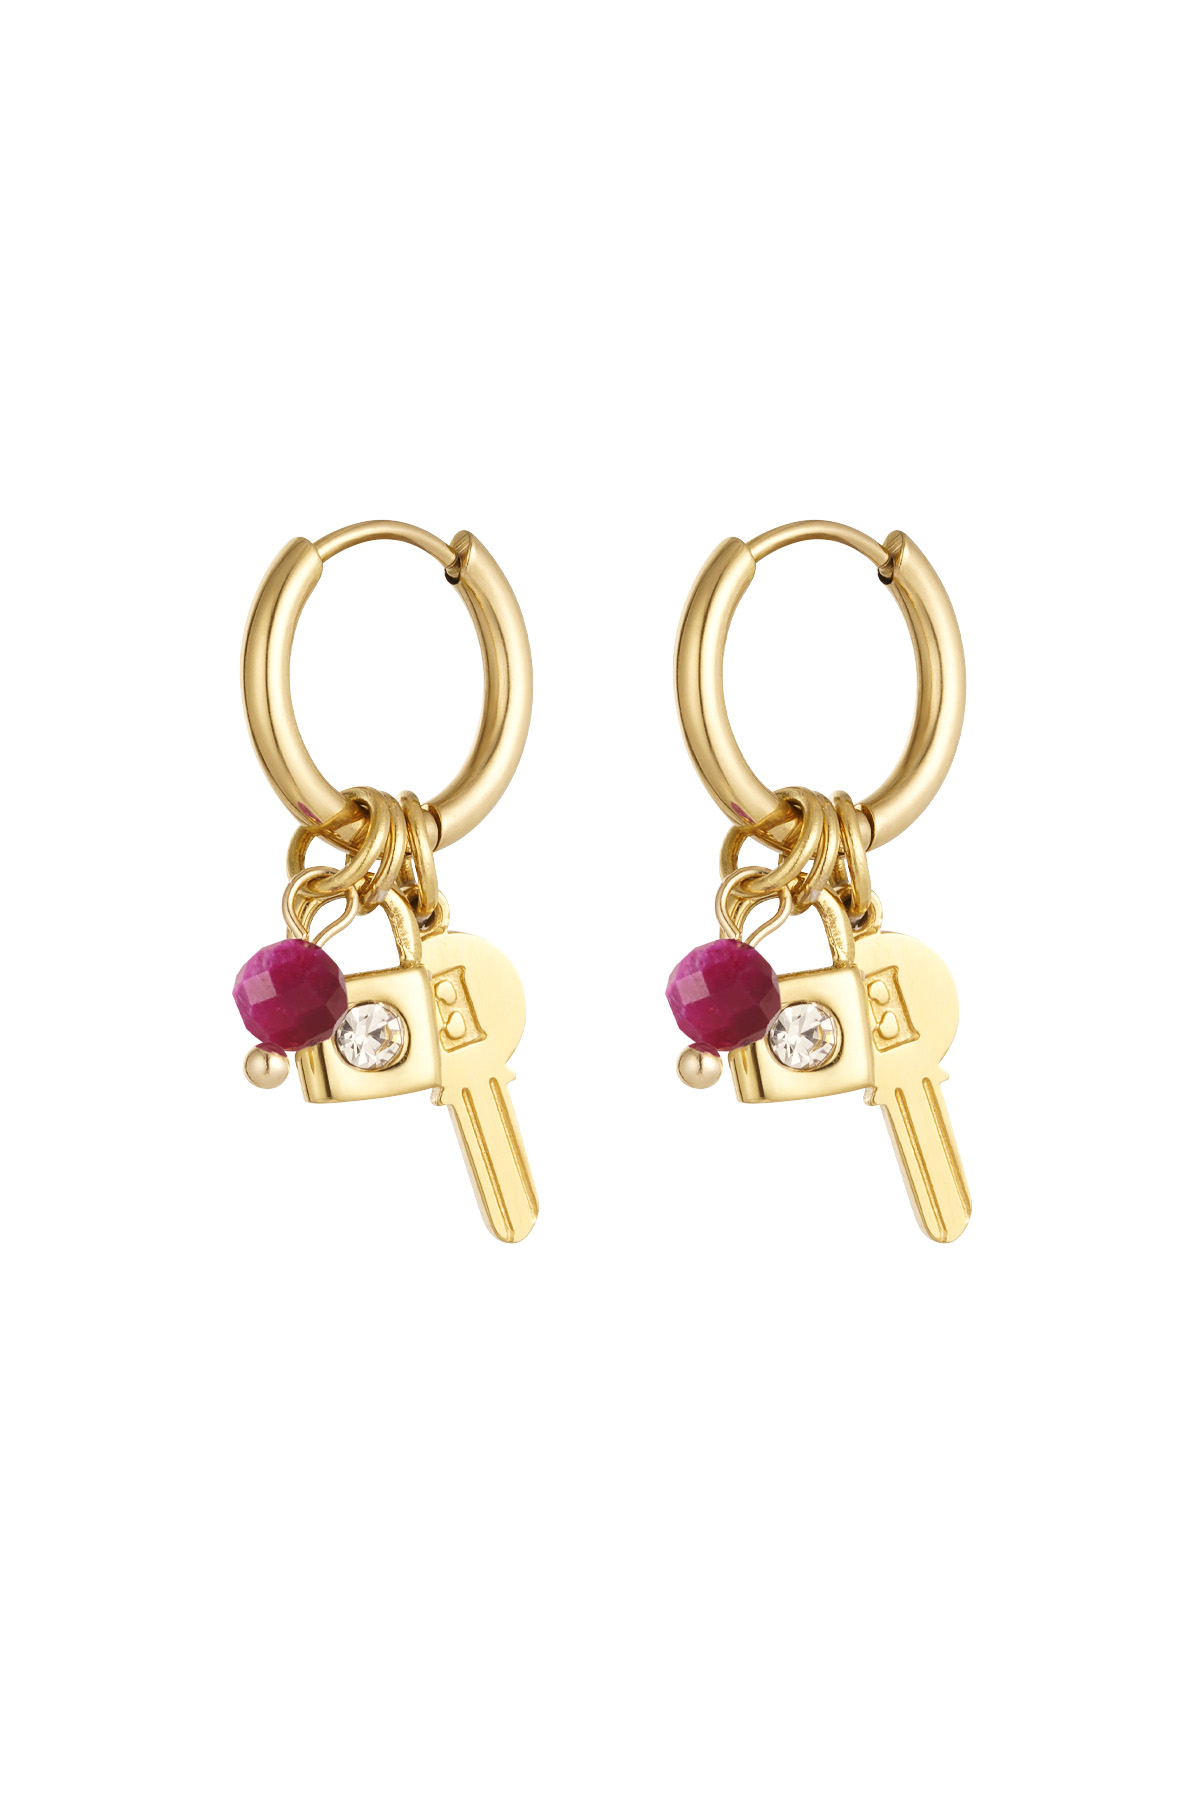 Key earrings with beads - gold/pink